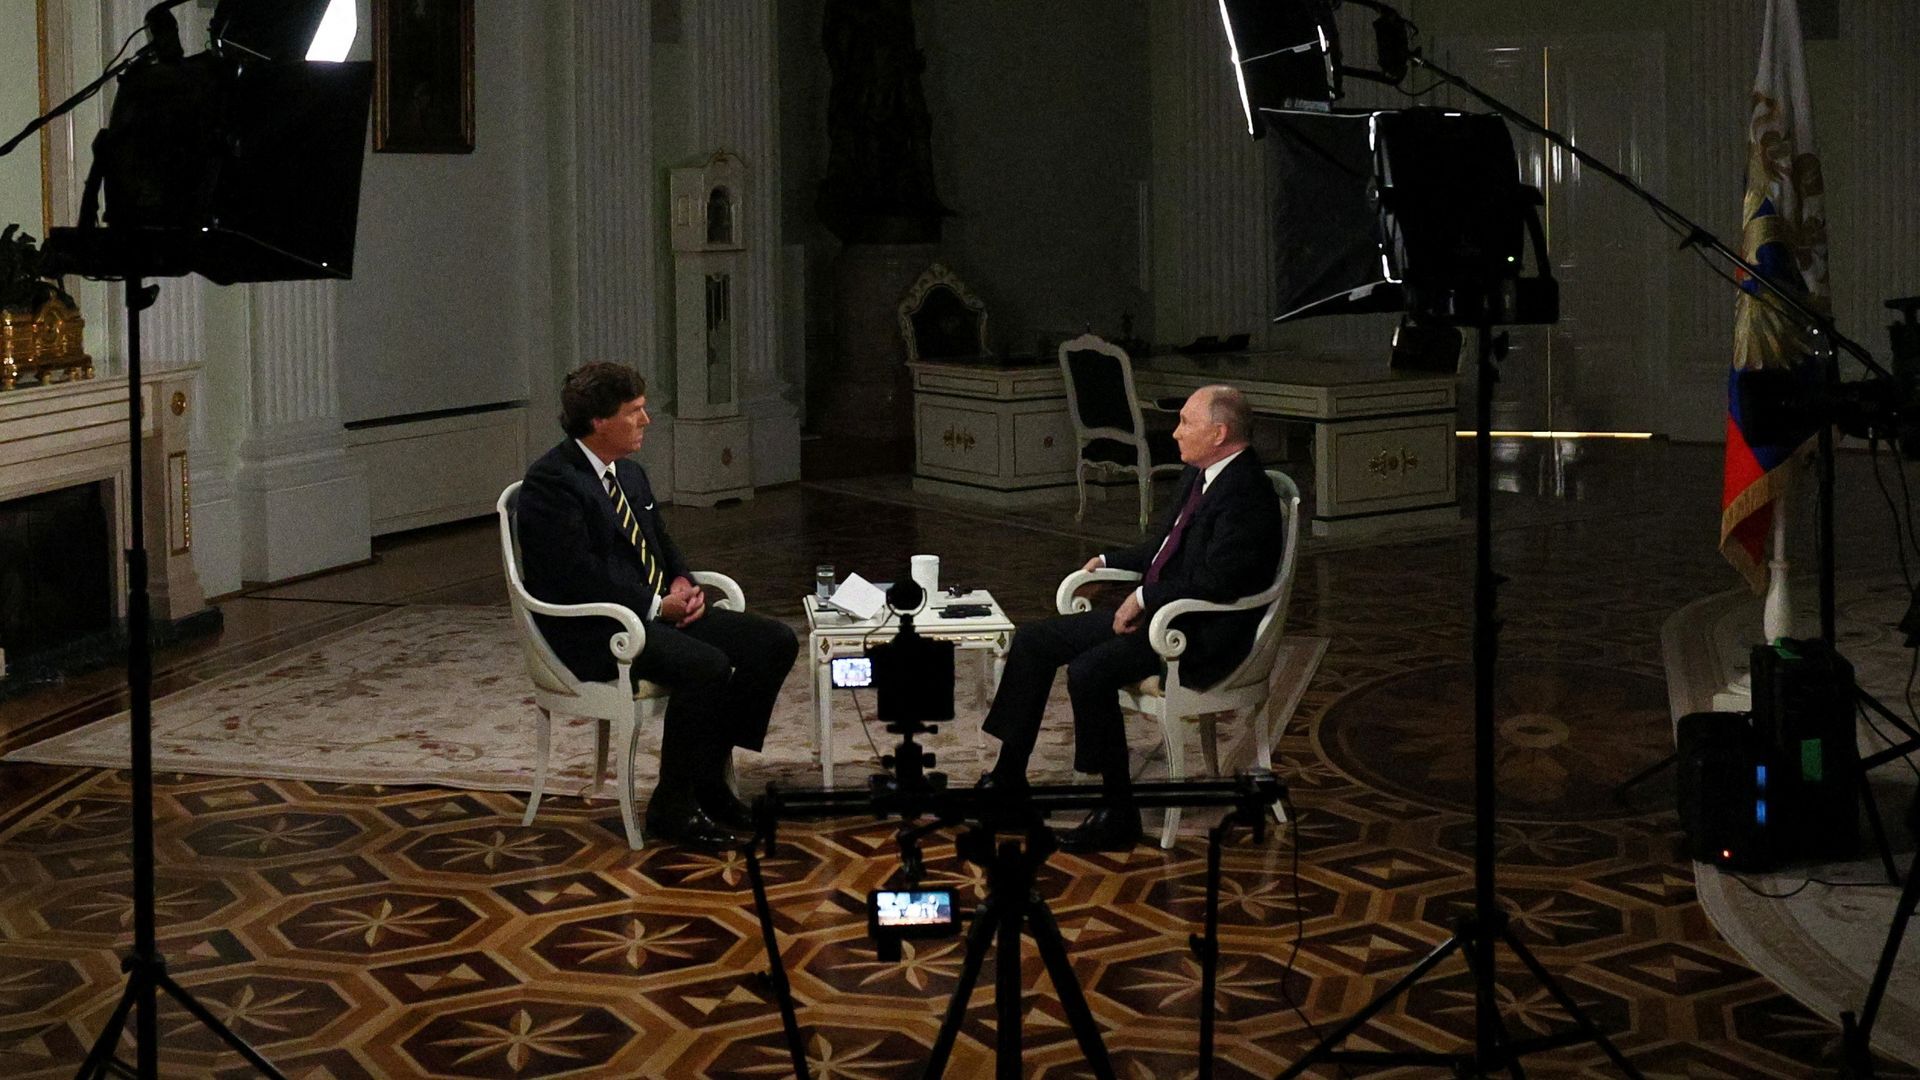 The interview with Tucker Carlson was the first time Putin agreed to sit down with a Western media member since the Russia-Ukraine war began.